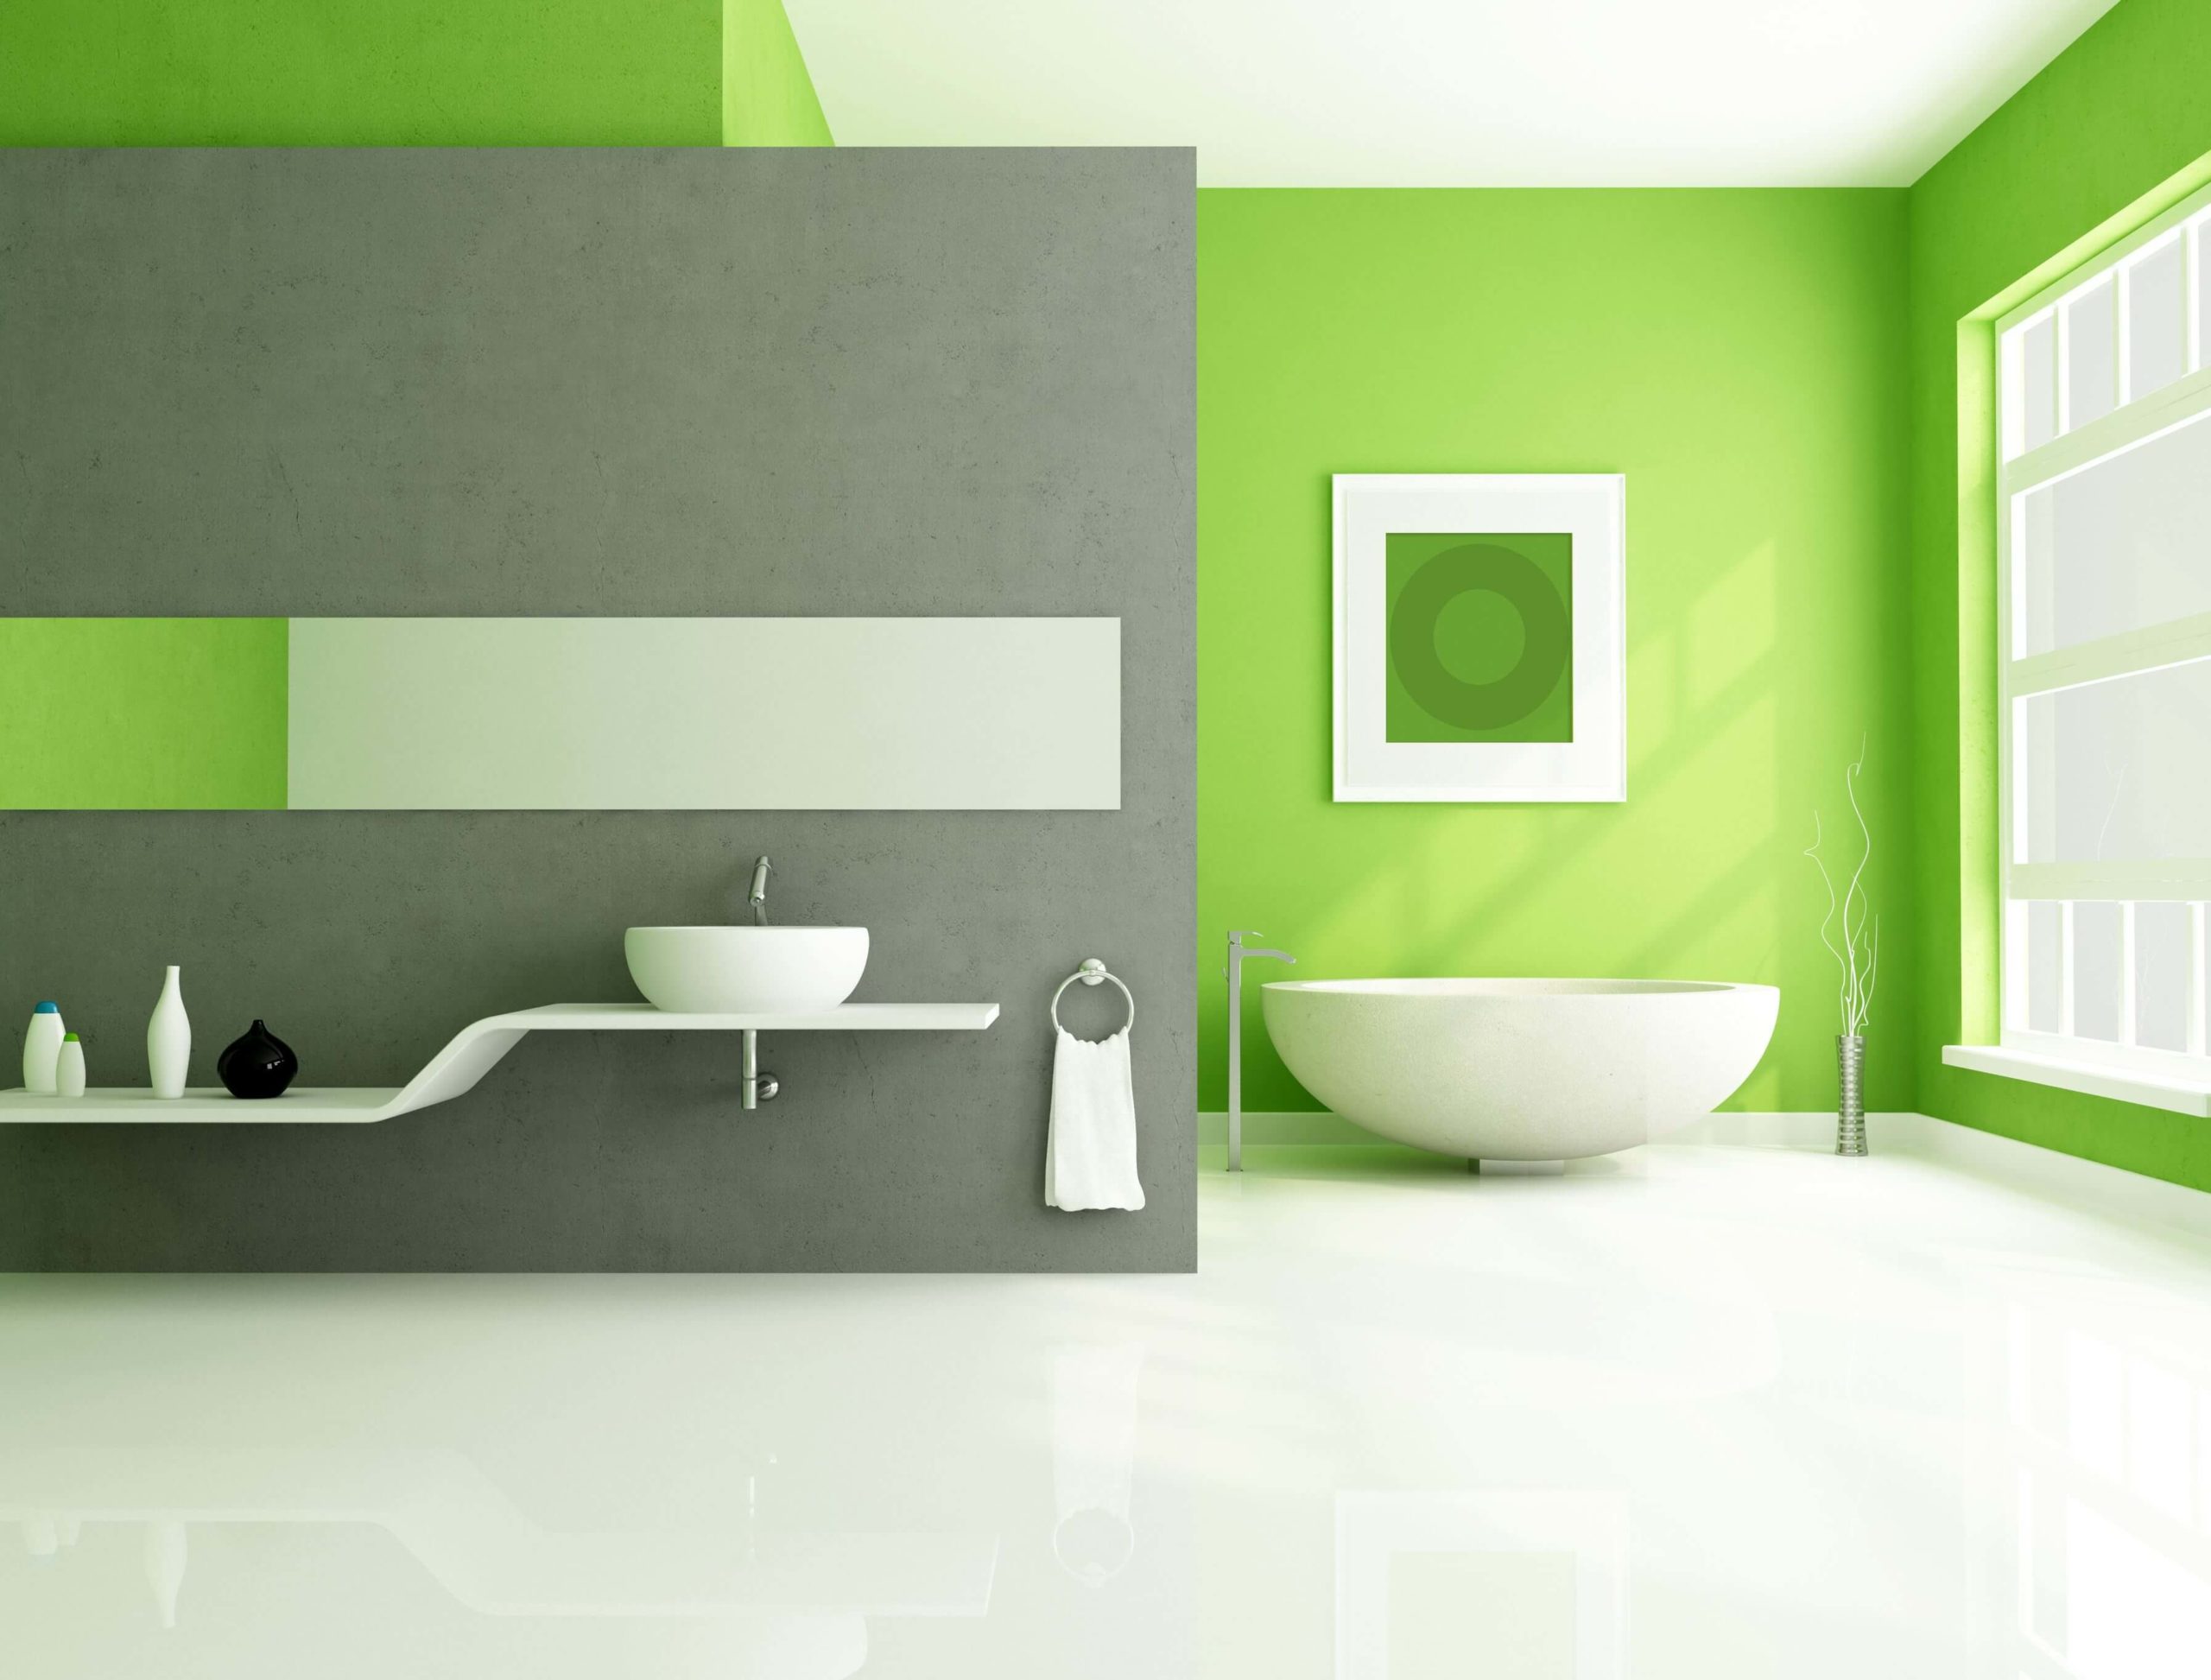 8- BATHROOM PROJECT WITH GREEN